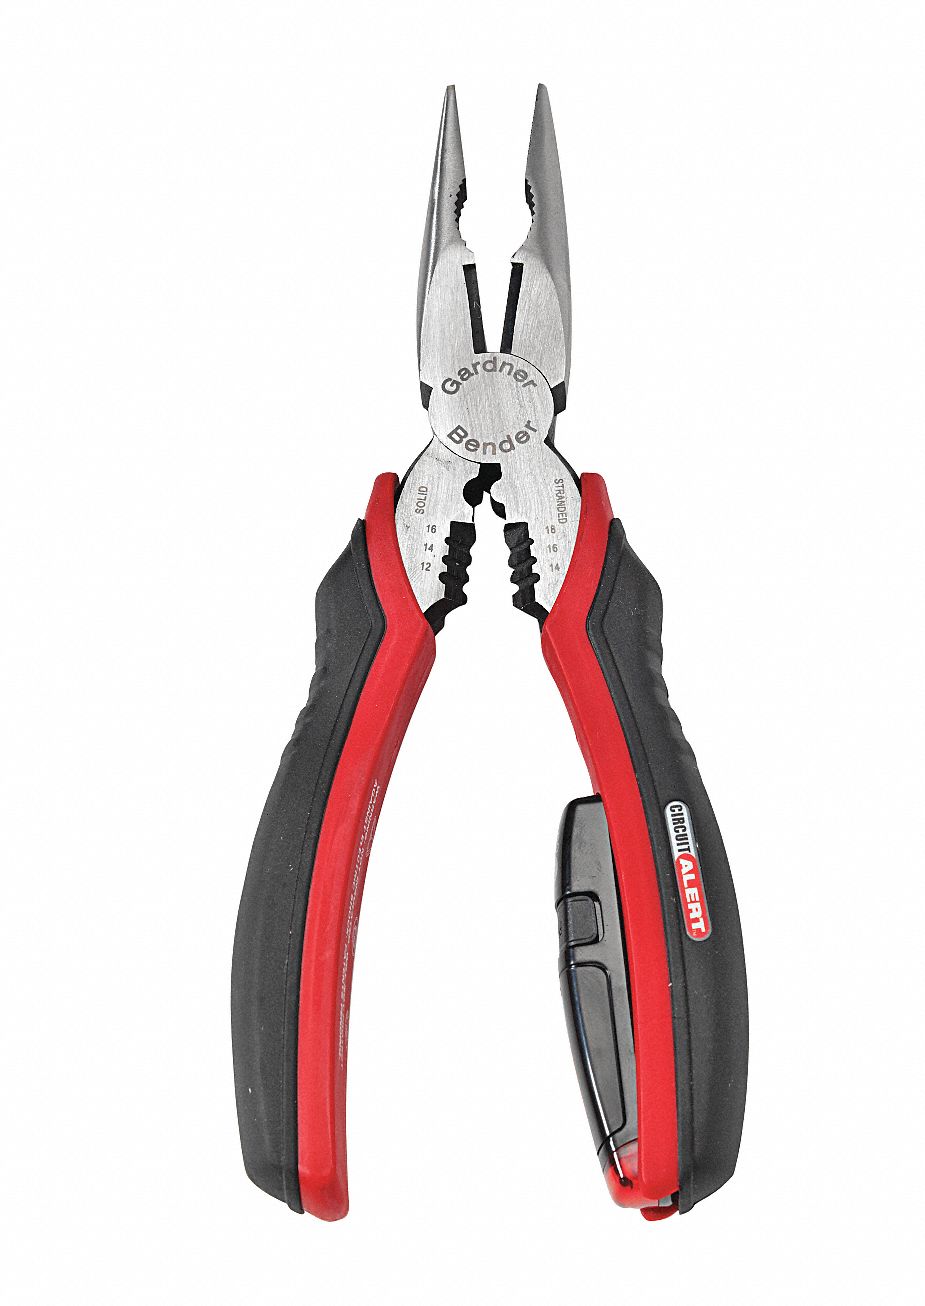 Voltage Sensing Plier: 2 1/4 in Max Jaw Opening, 8 in Overall Lg, 2 1/2 in Jaw Lg, 3/16 in Tip Wd